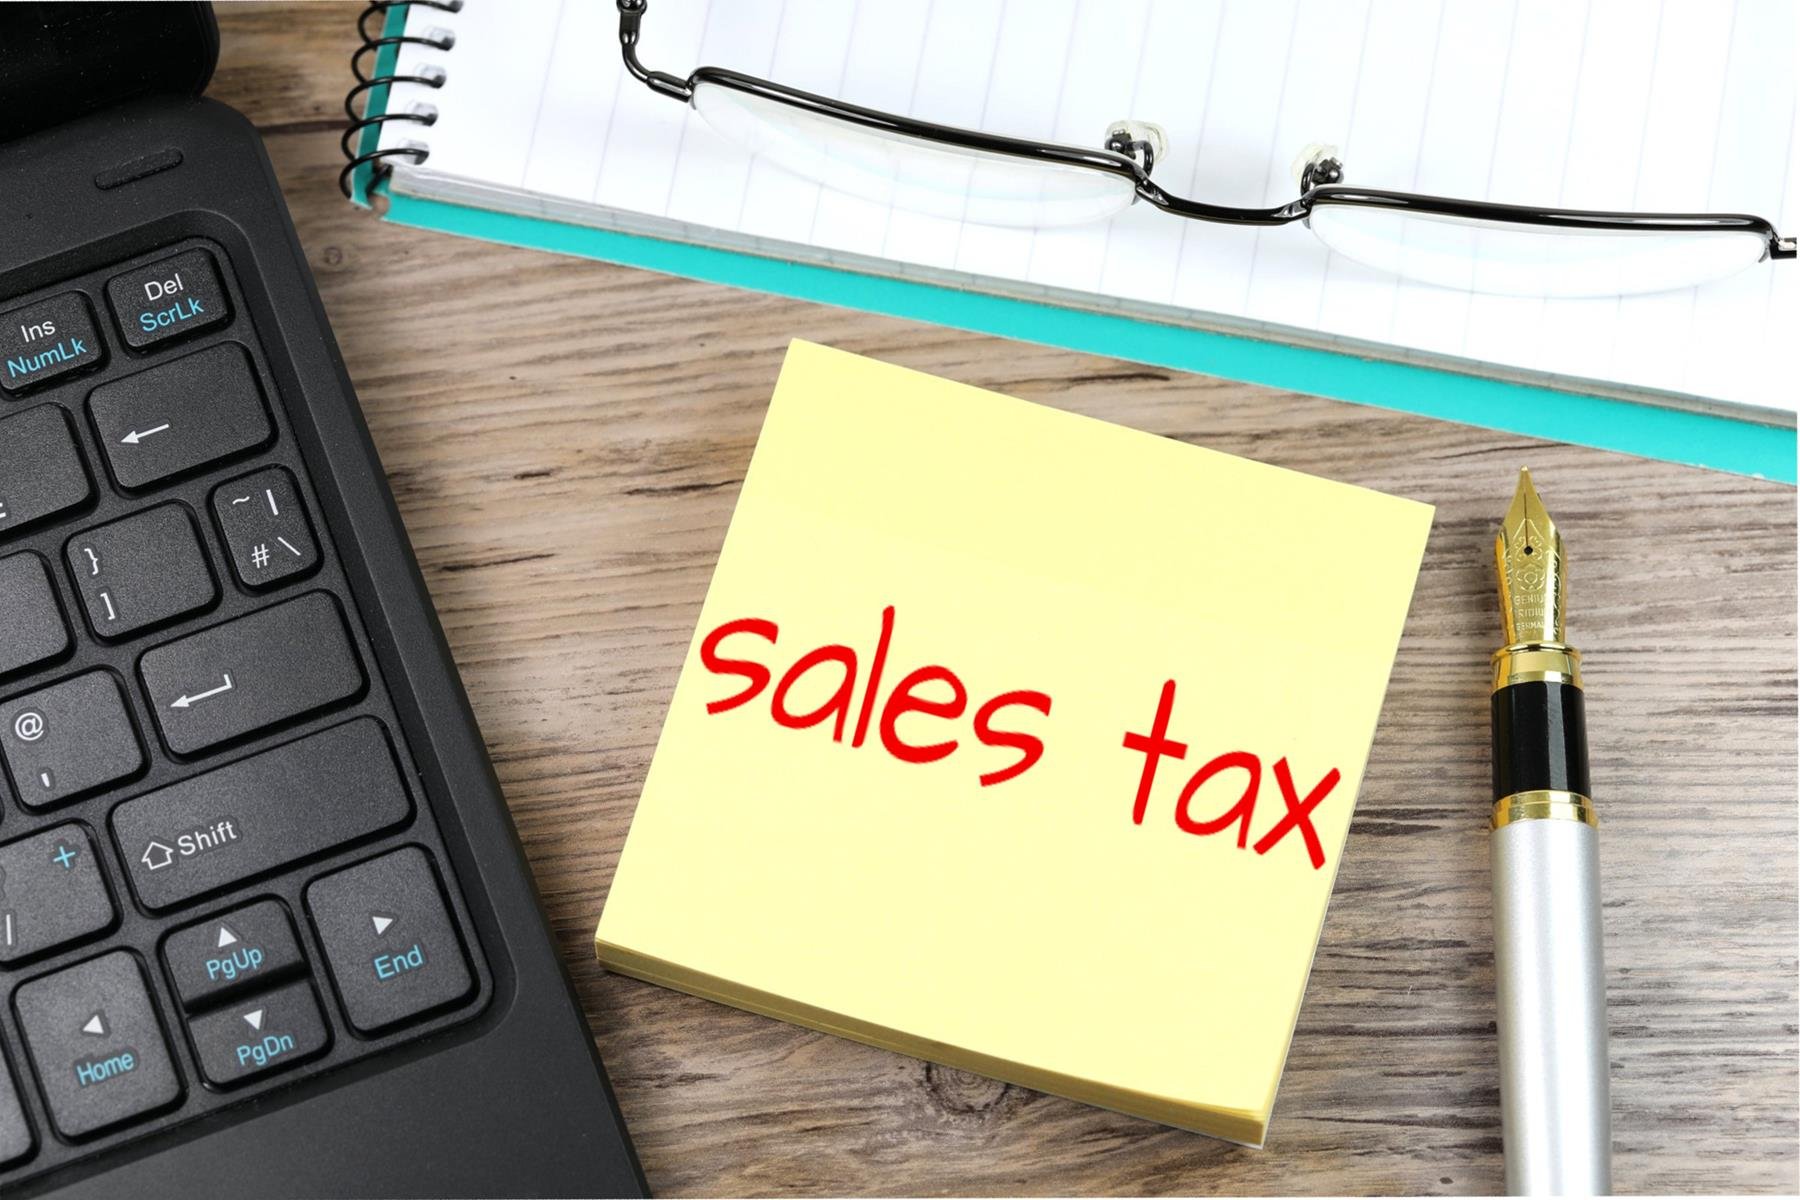 What is the Sales Tax in NYC?